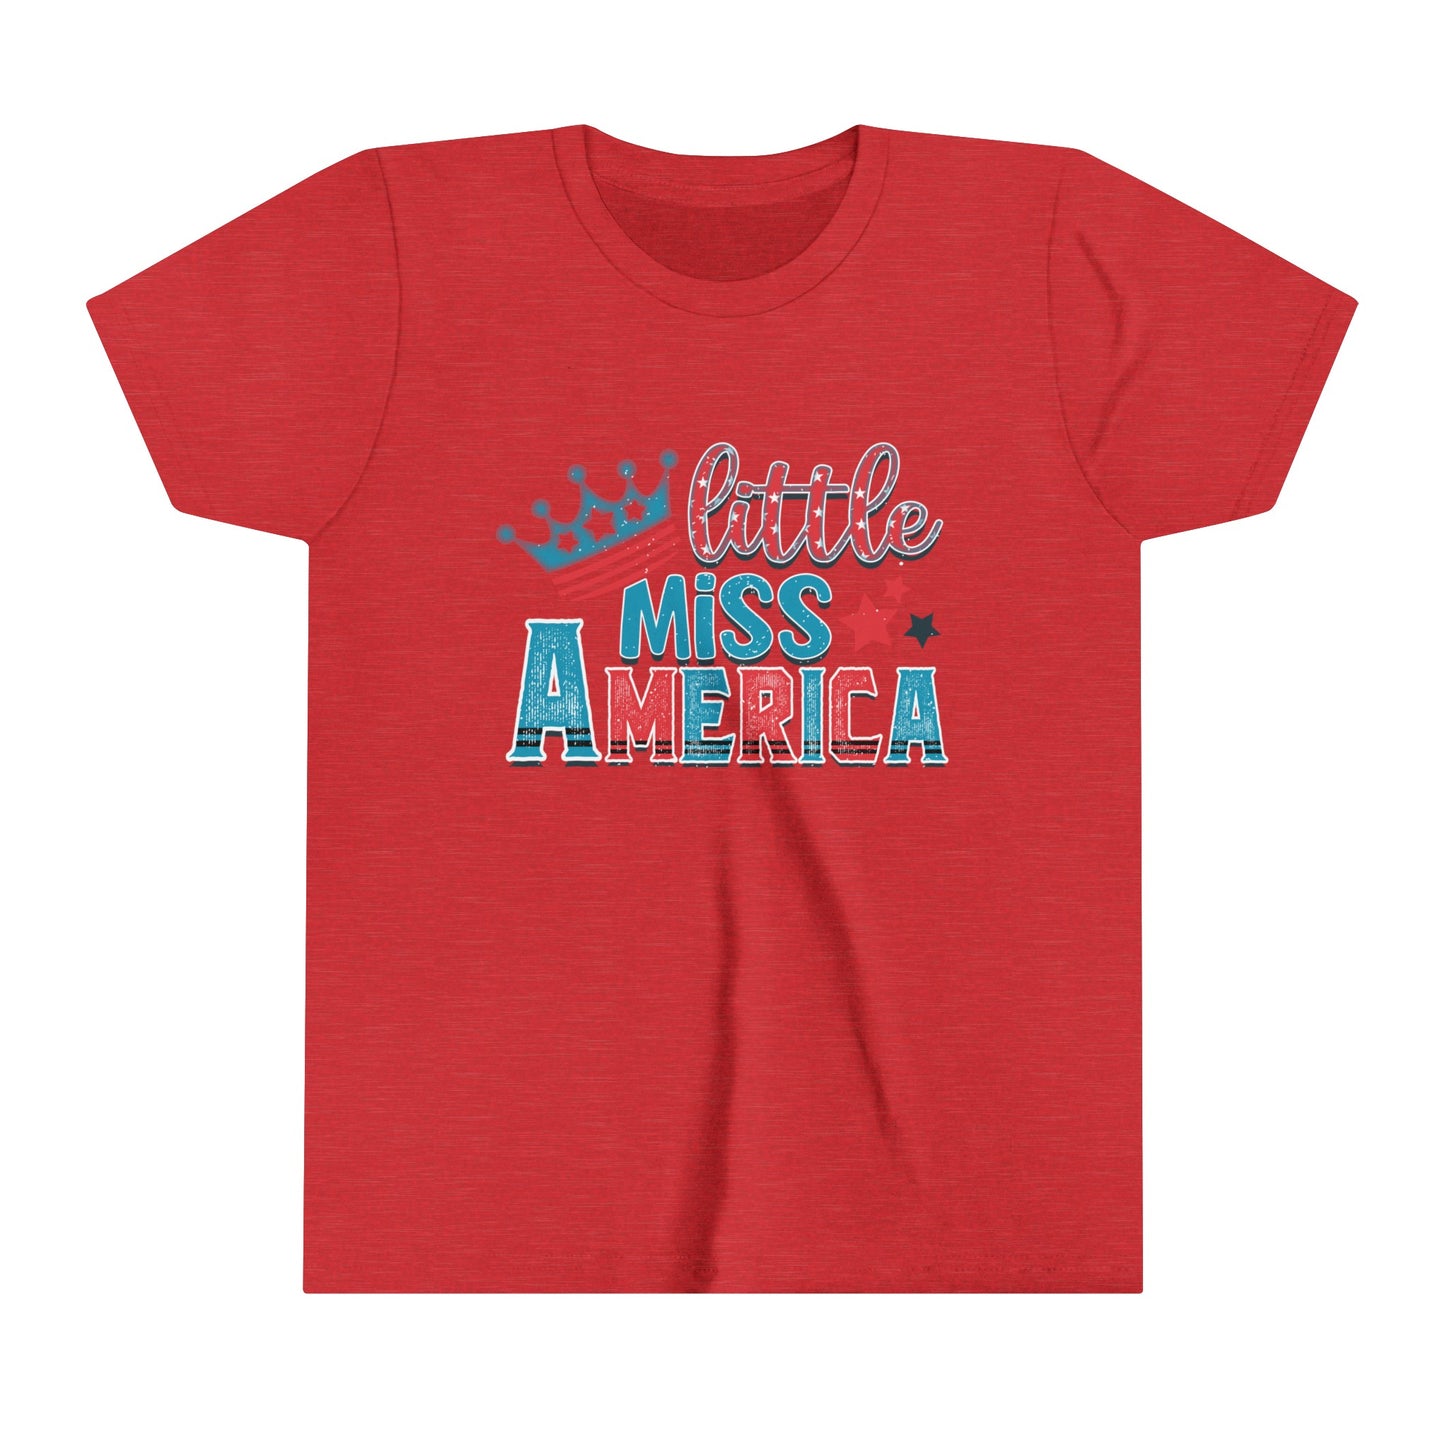 Little Miss America Girl's 4th of July USA Youth Shirt